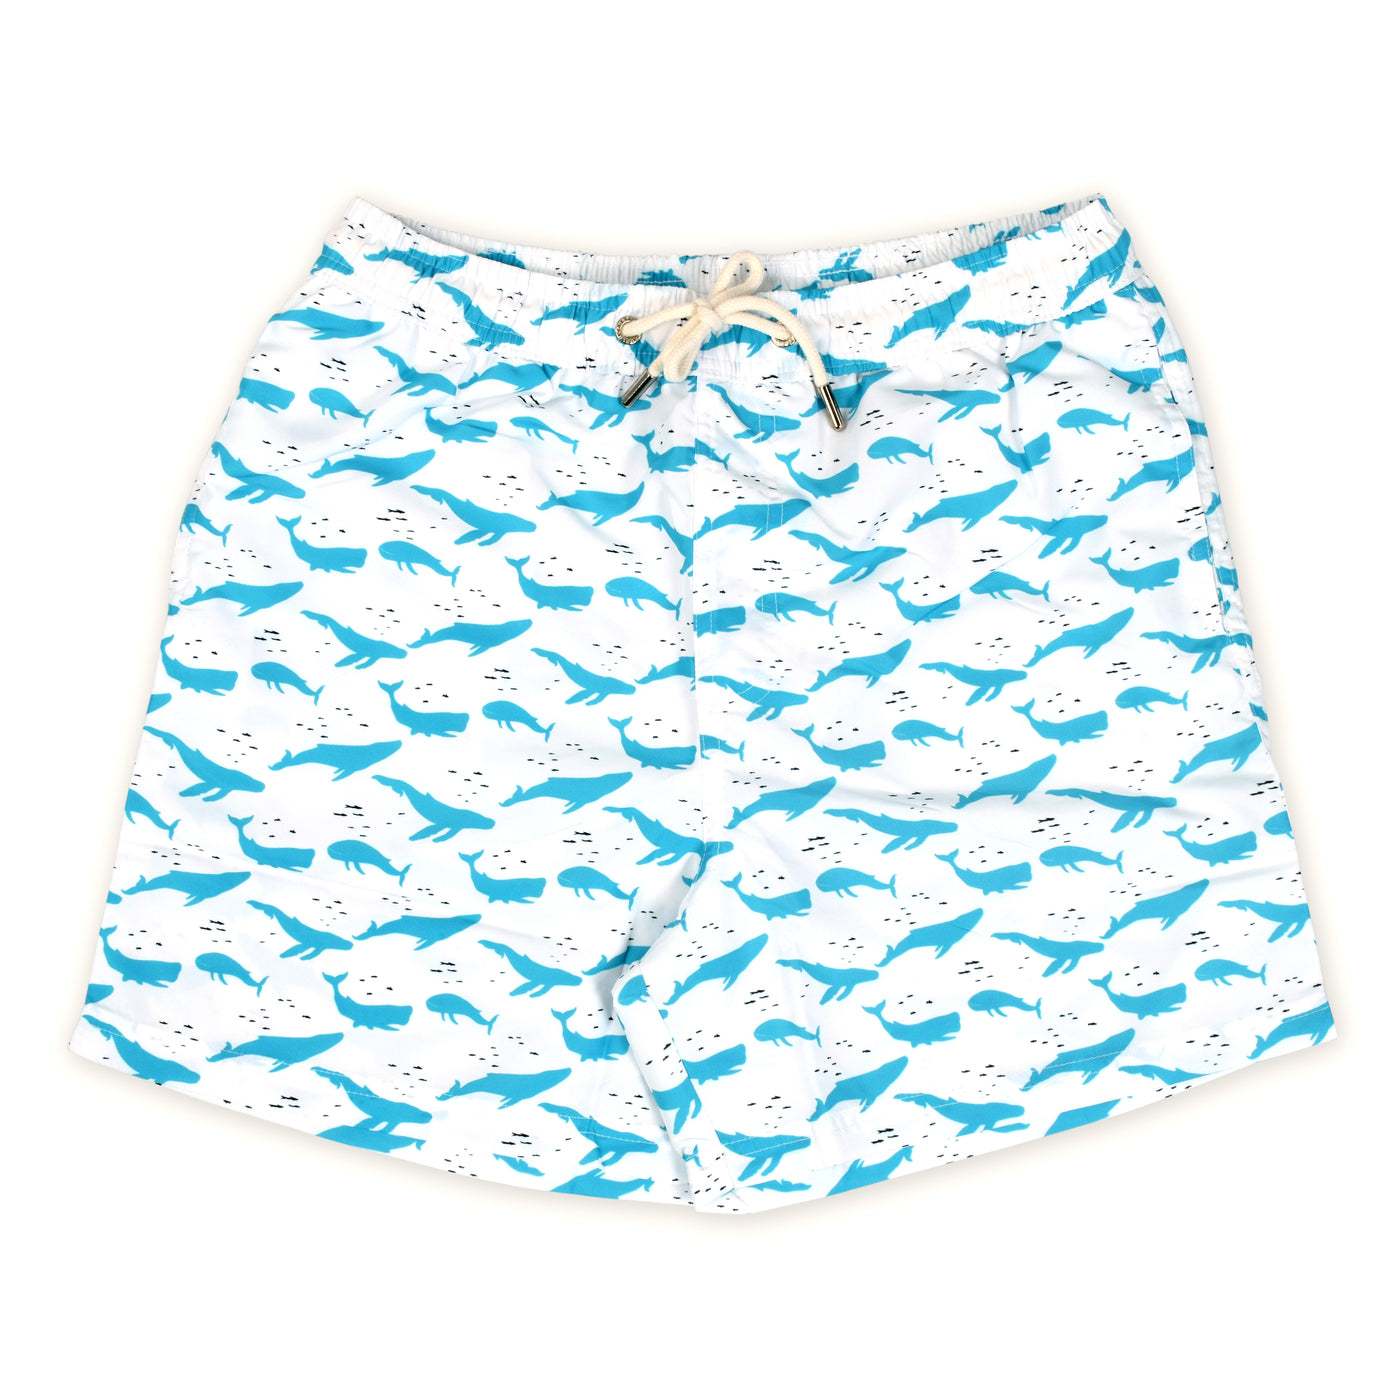 Buy now whale, hello there swim shorts